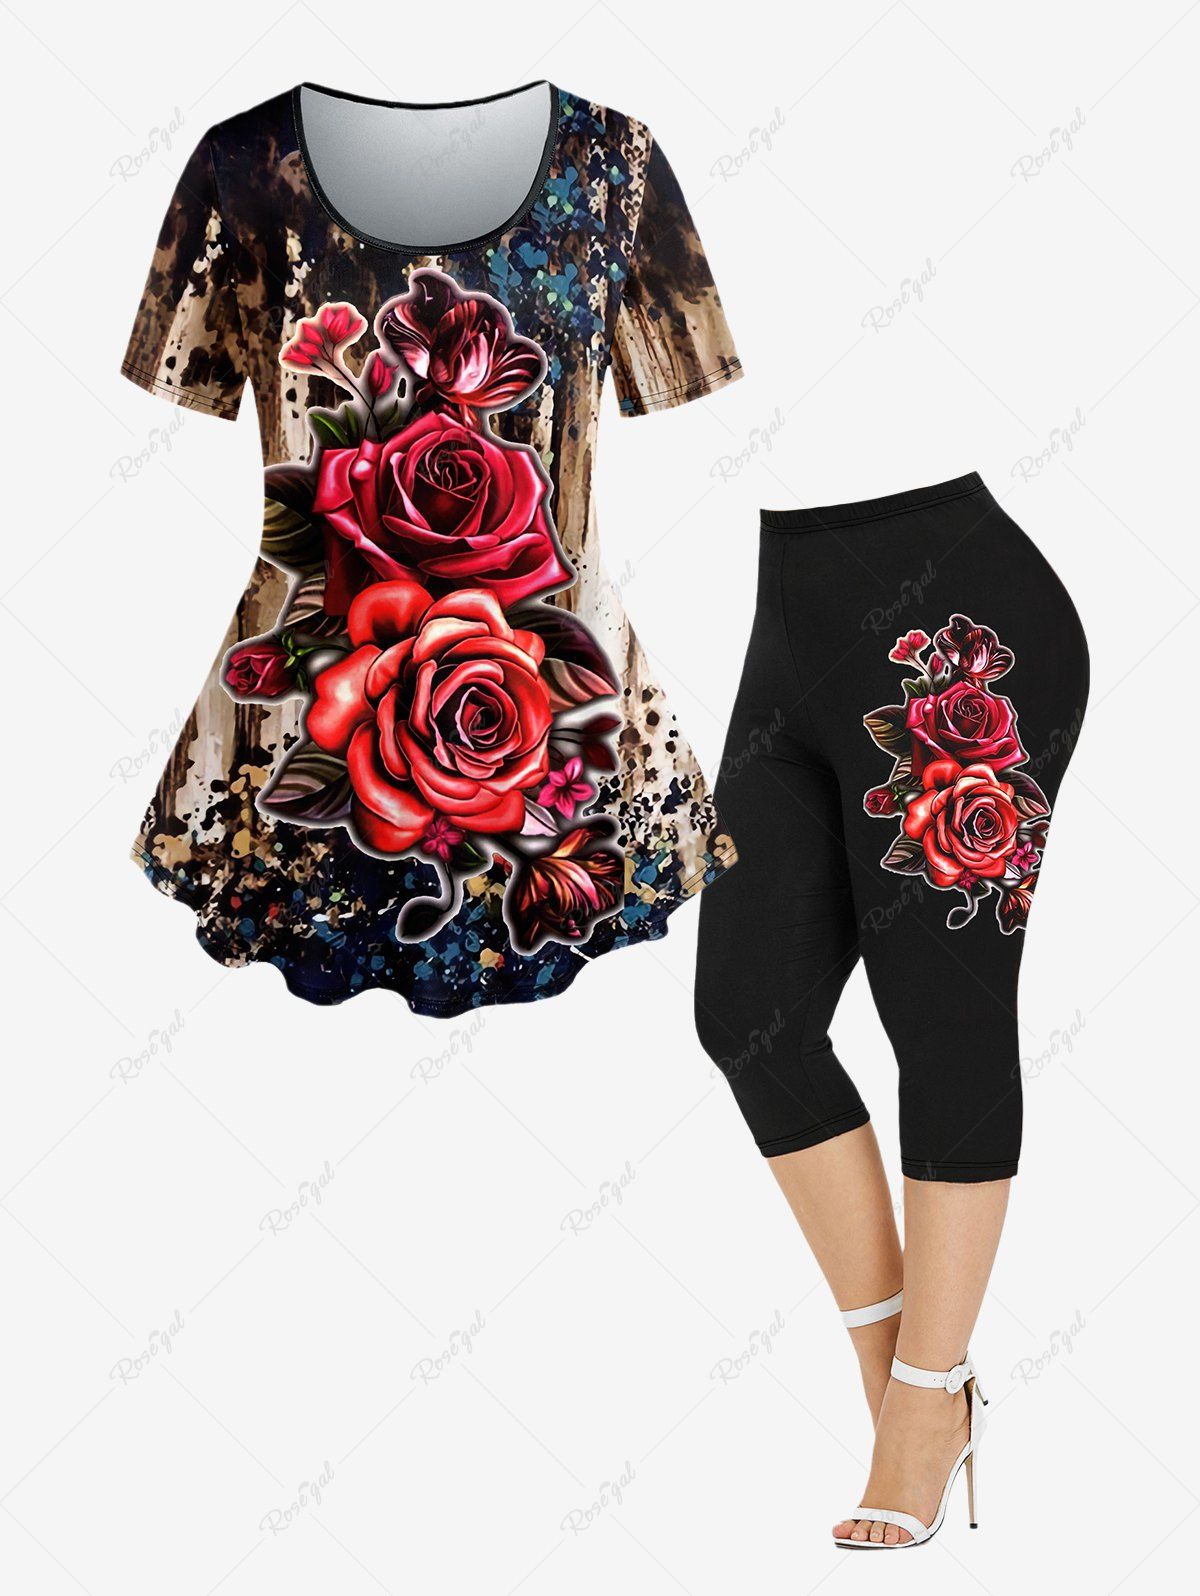 Fancy Plus Size Tie Dye Colorblock Rose Floral Printed Short Sleeves T-shirt and Leggings Outfit  